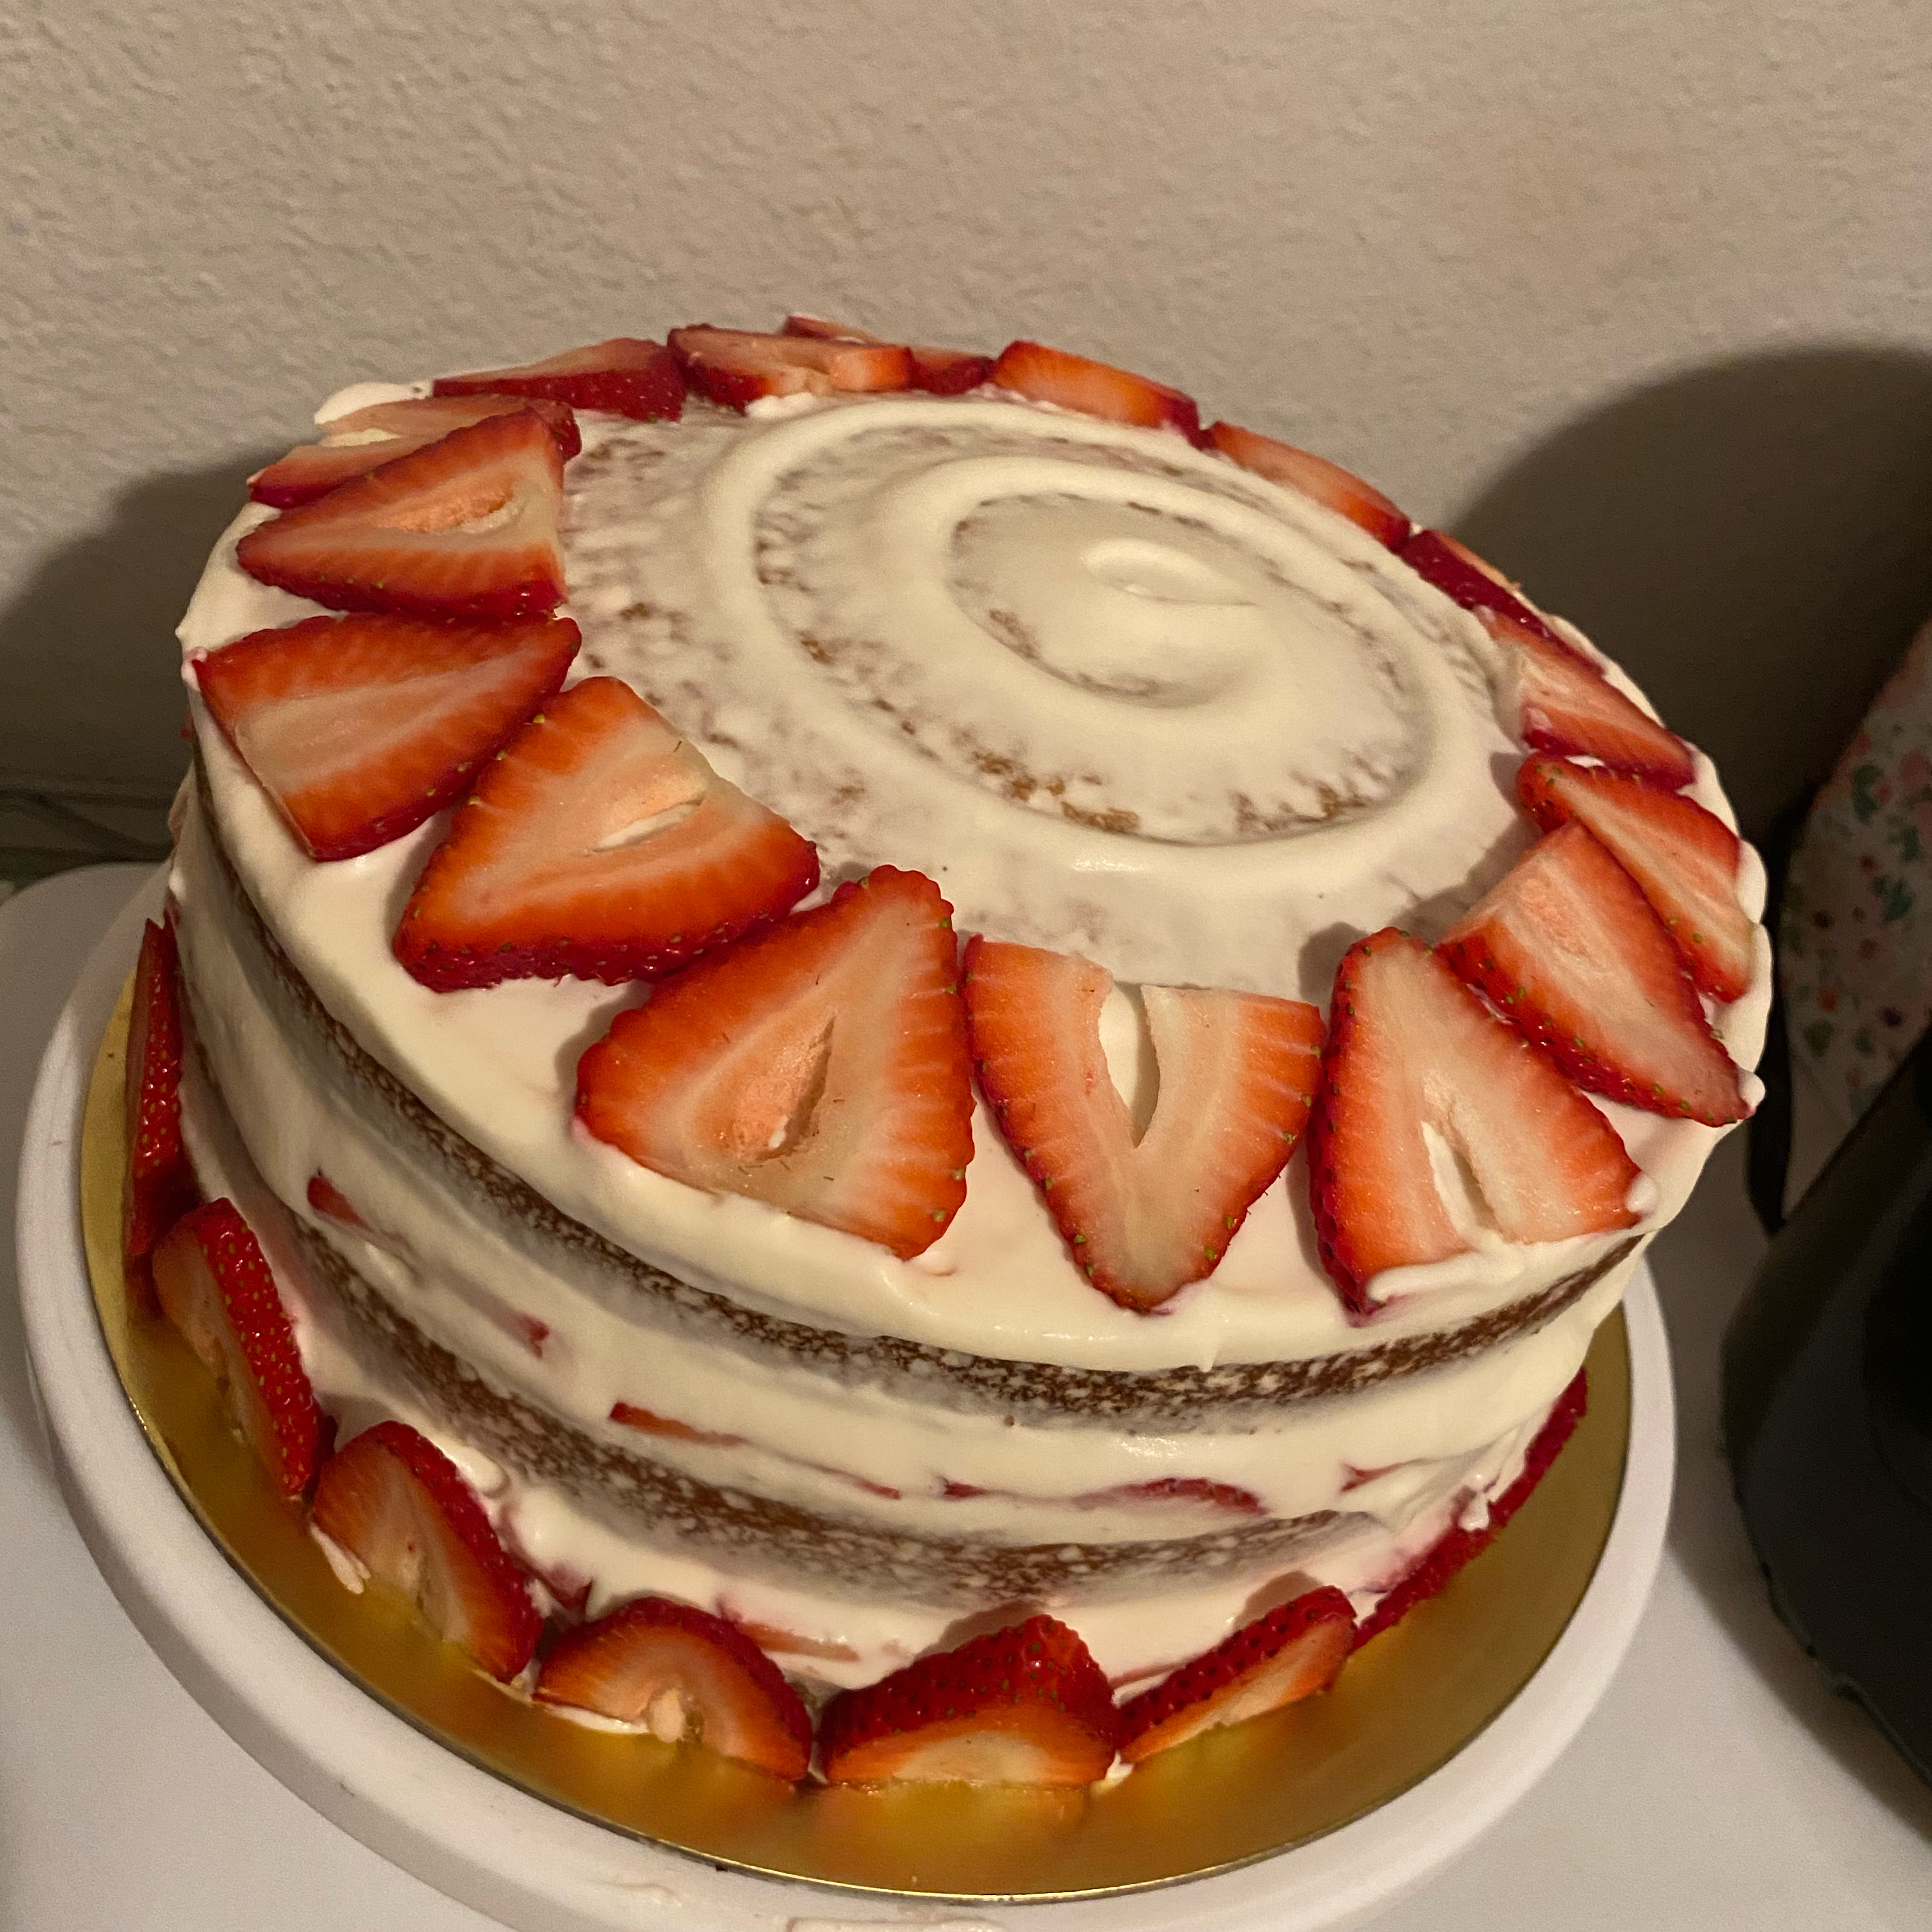 Carry Cake with Strawberries and Whipped Cream Angelina